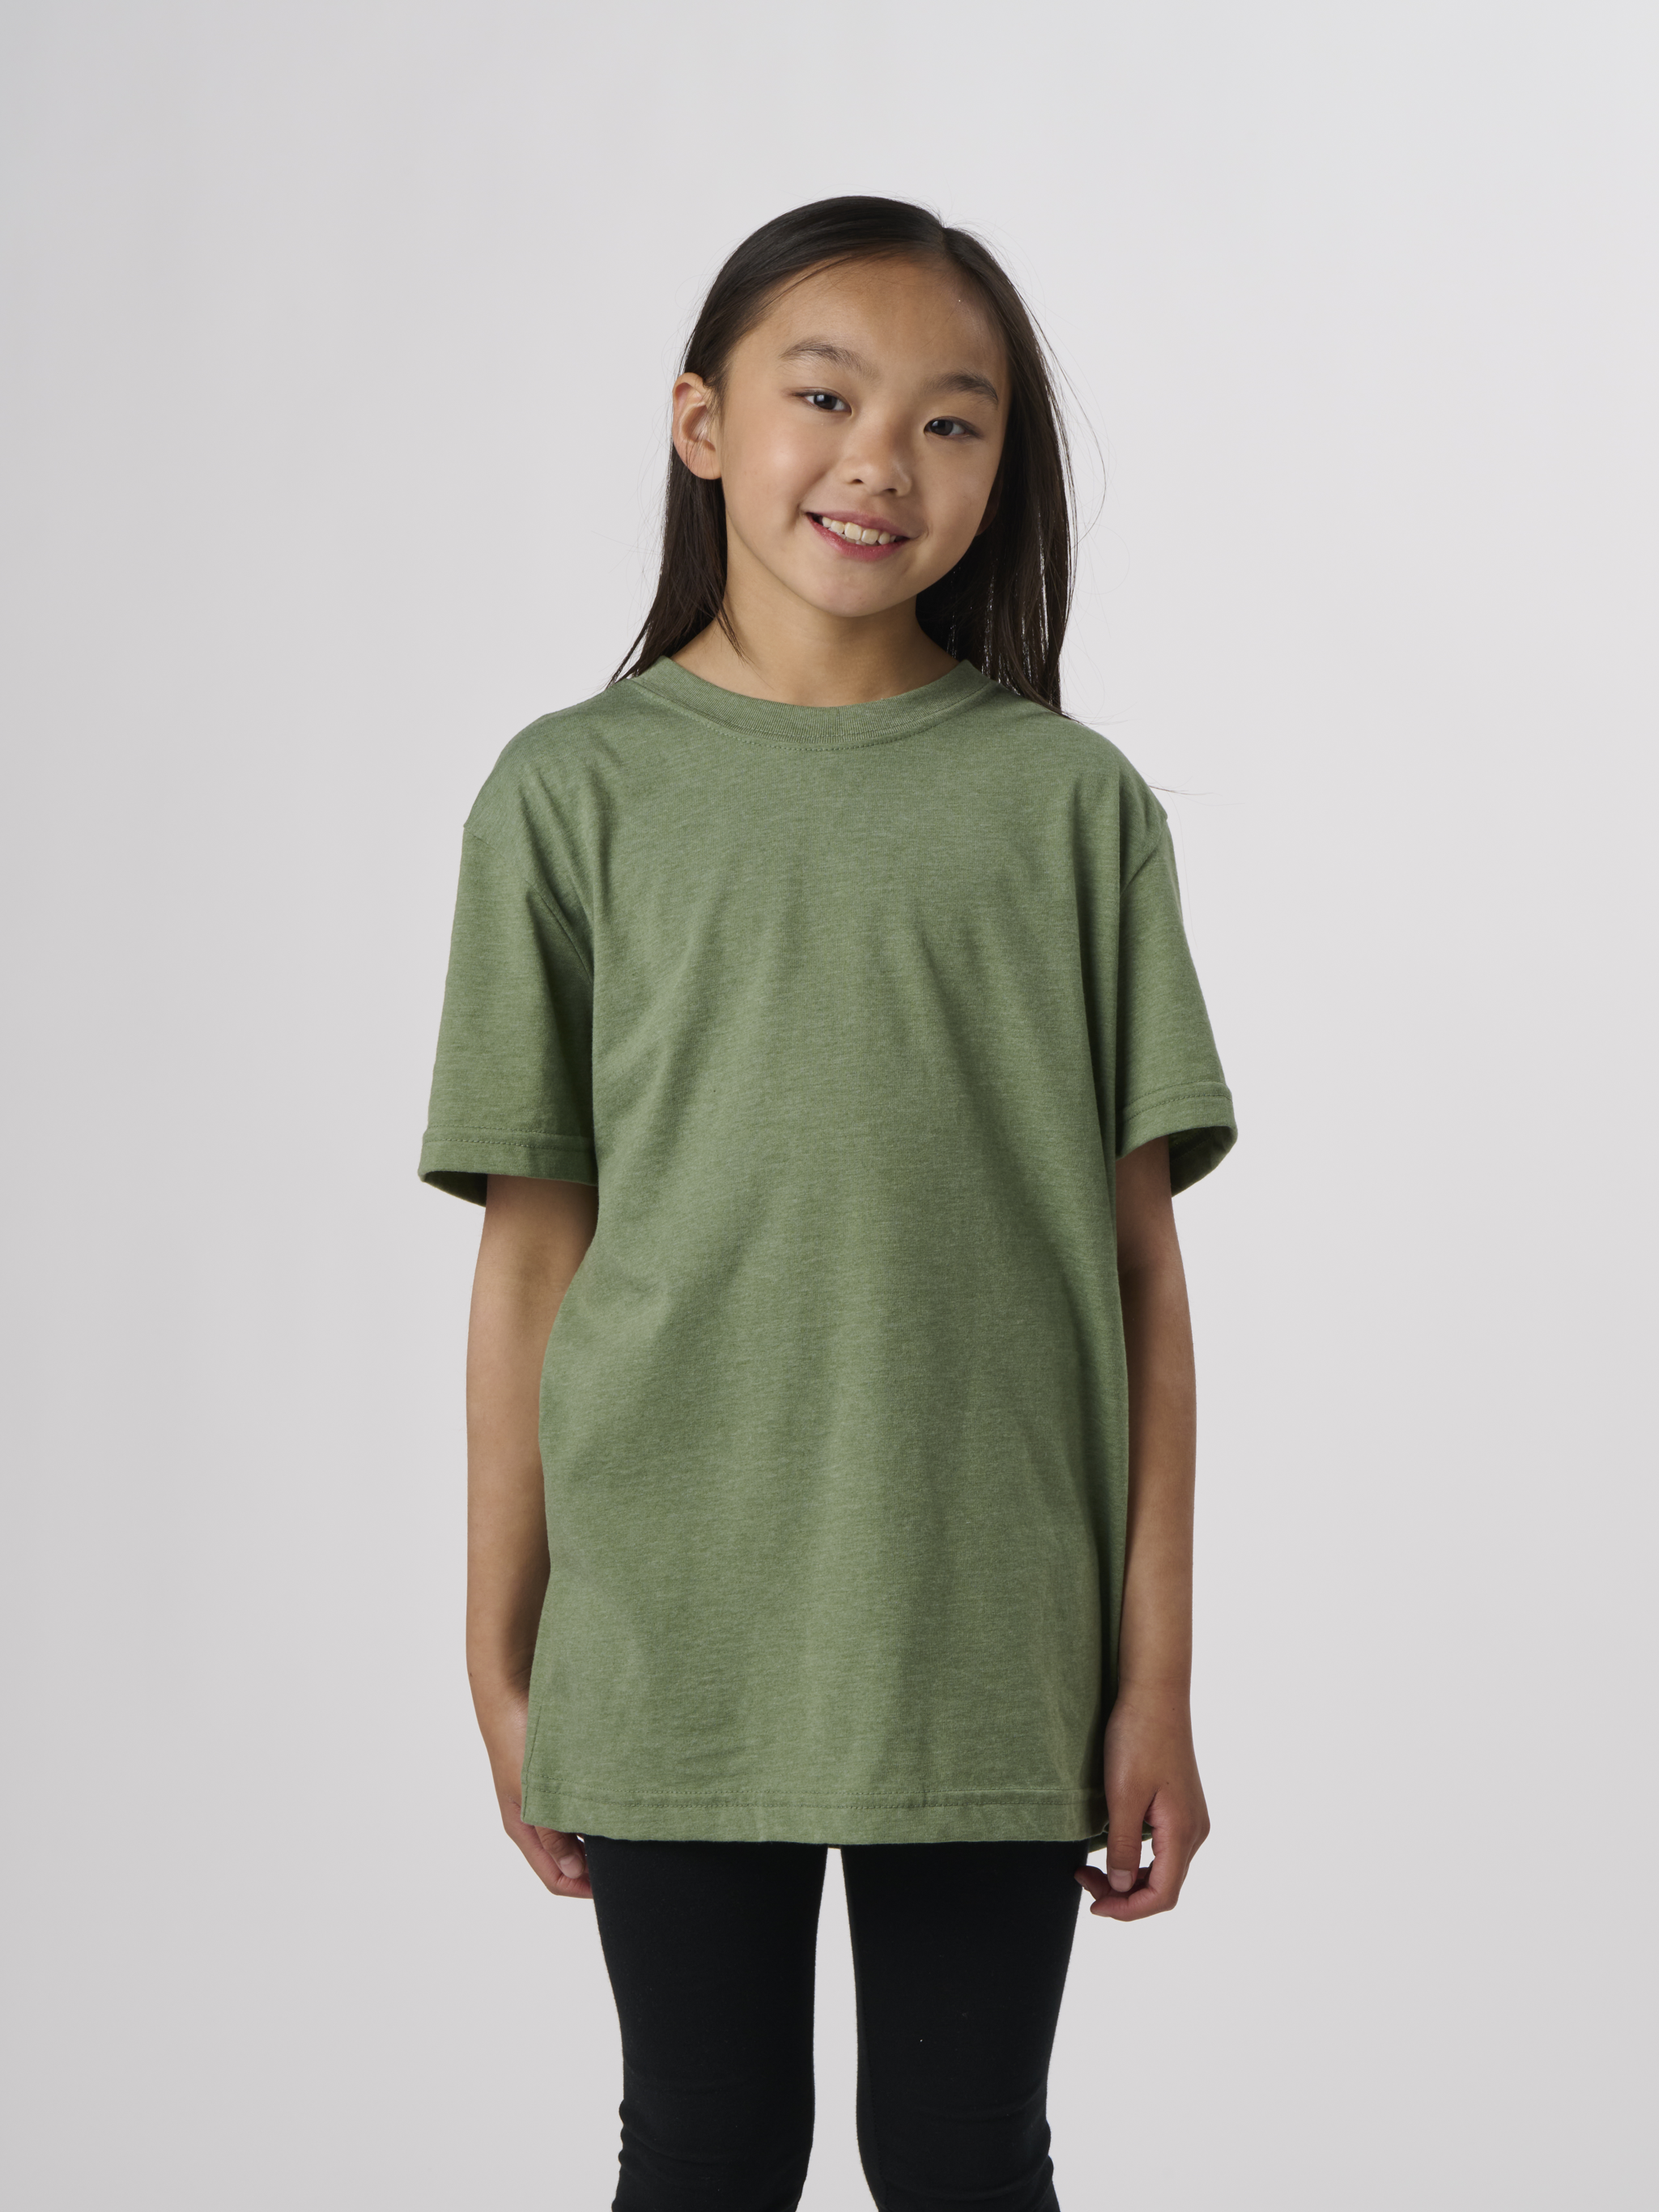 RECOVER_EY100_ECOYOUTHSHORTSLEEVETSHIRT_FERN_FRONT.png